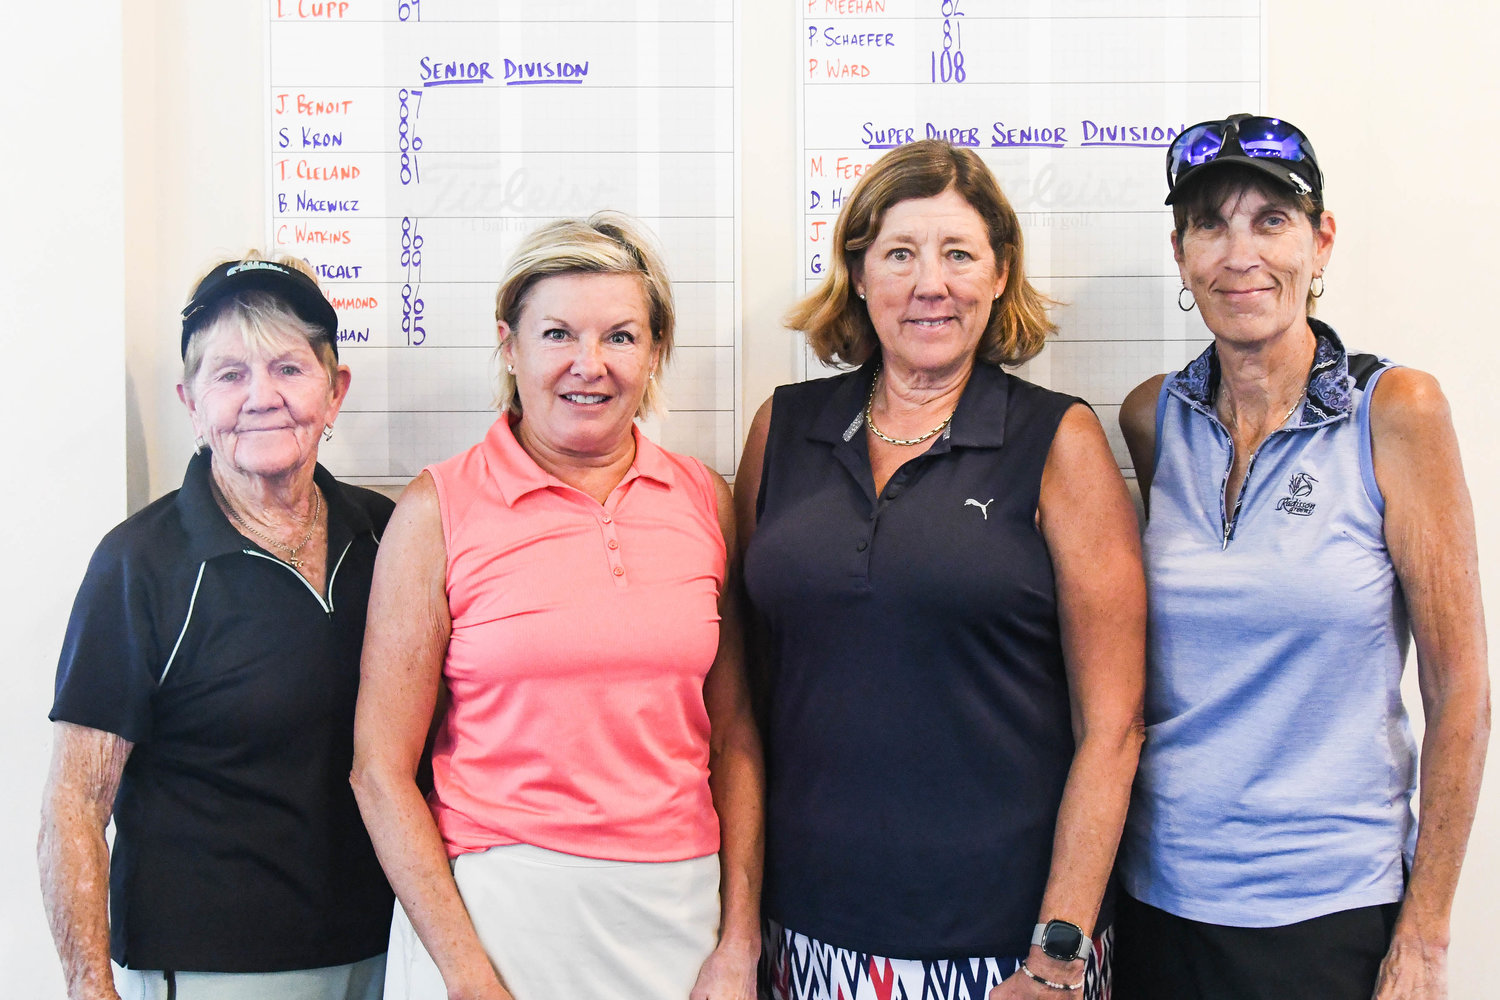 There were 16 participants in the 53rd Rome City Women’s Amateur Golf Championship Monday at Rome Country Club. They included, from left: Joan Kay, Nancy Outcalt, Pamela Ward and Marianne Ferris.